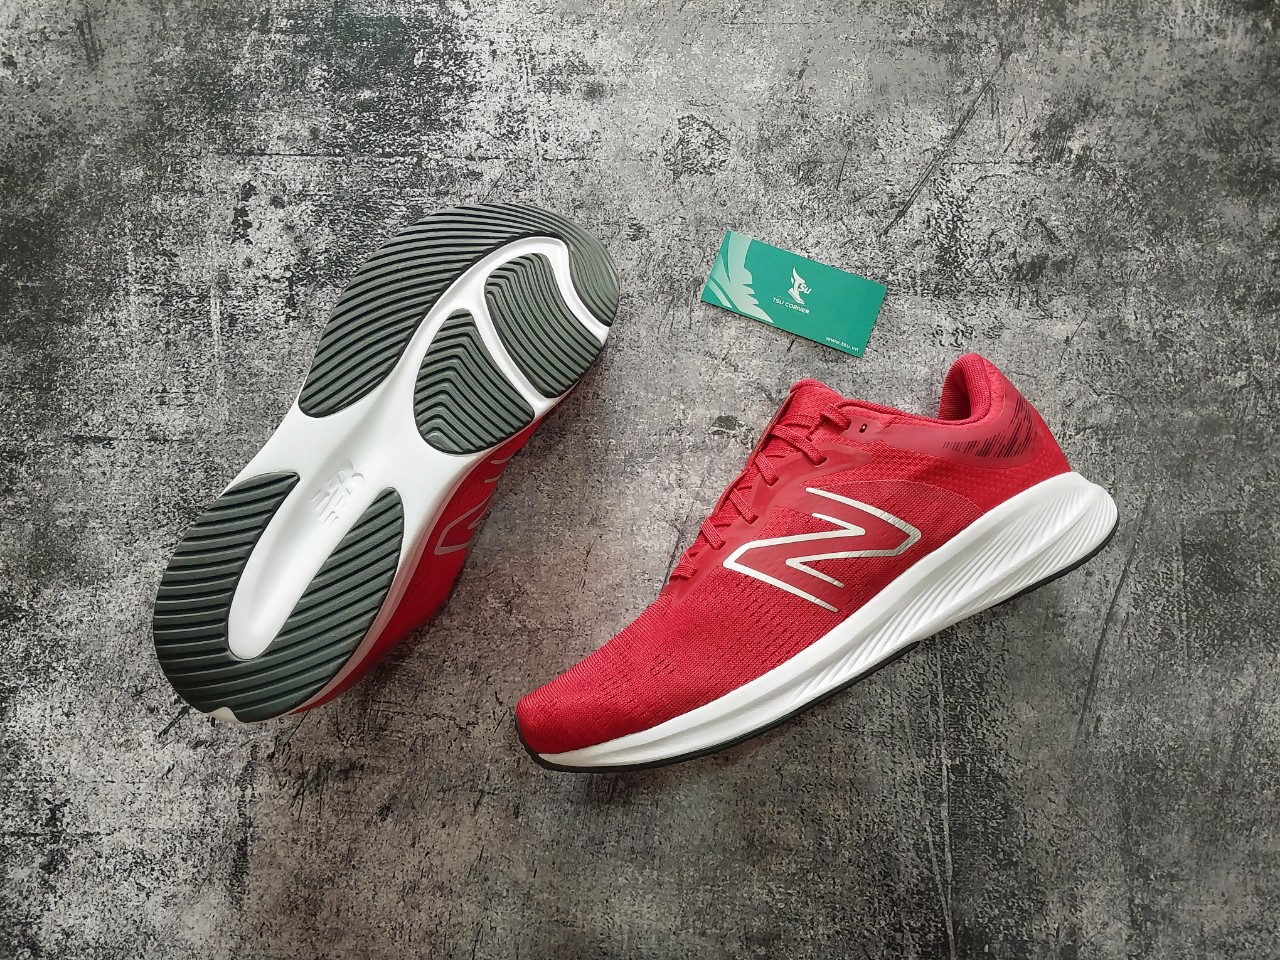 Giày thể thao New Balance nam - Red